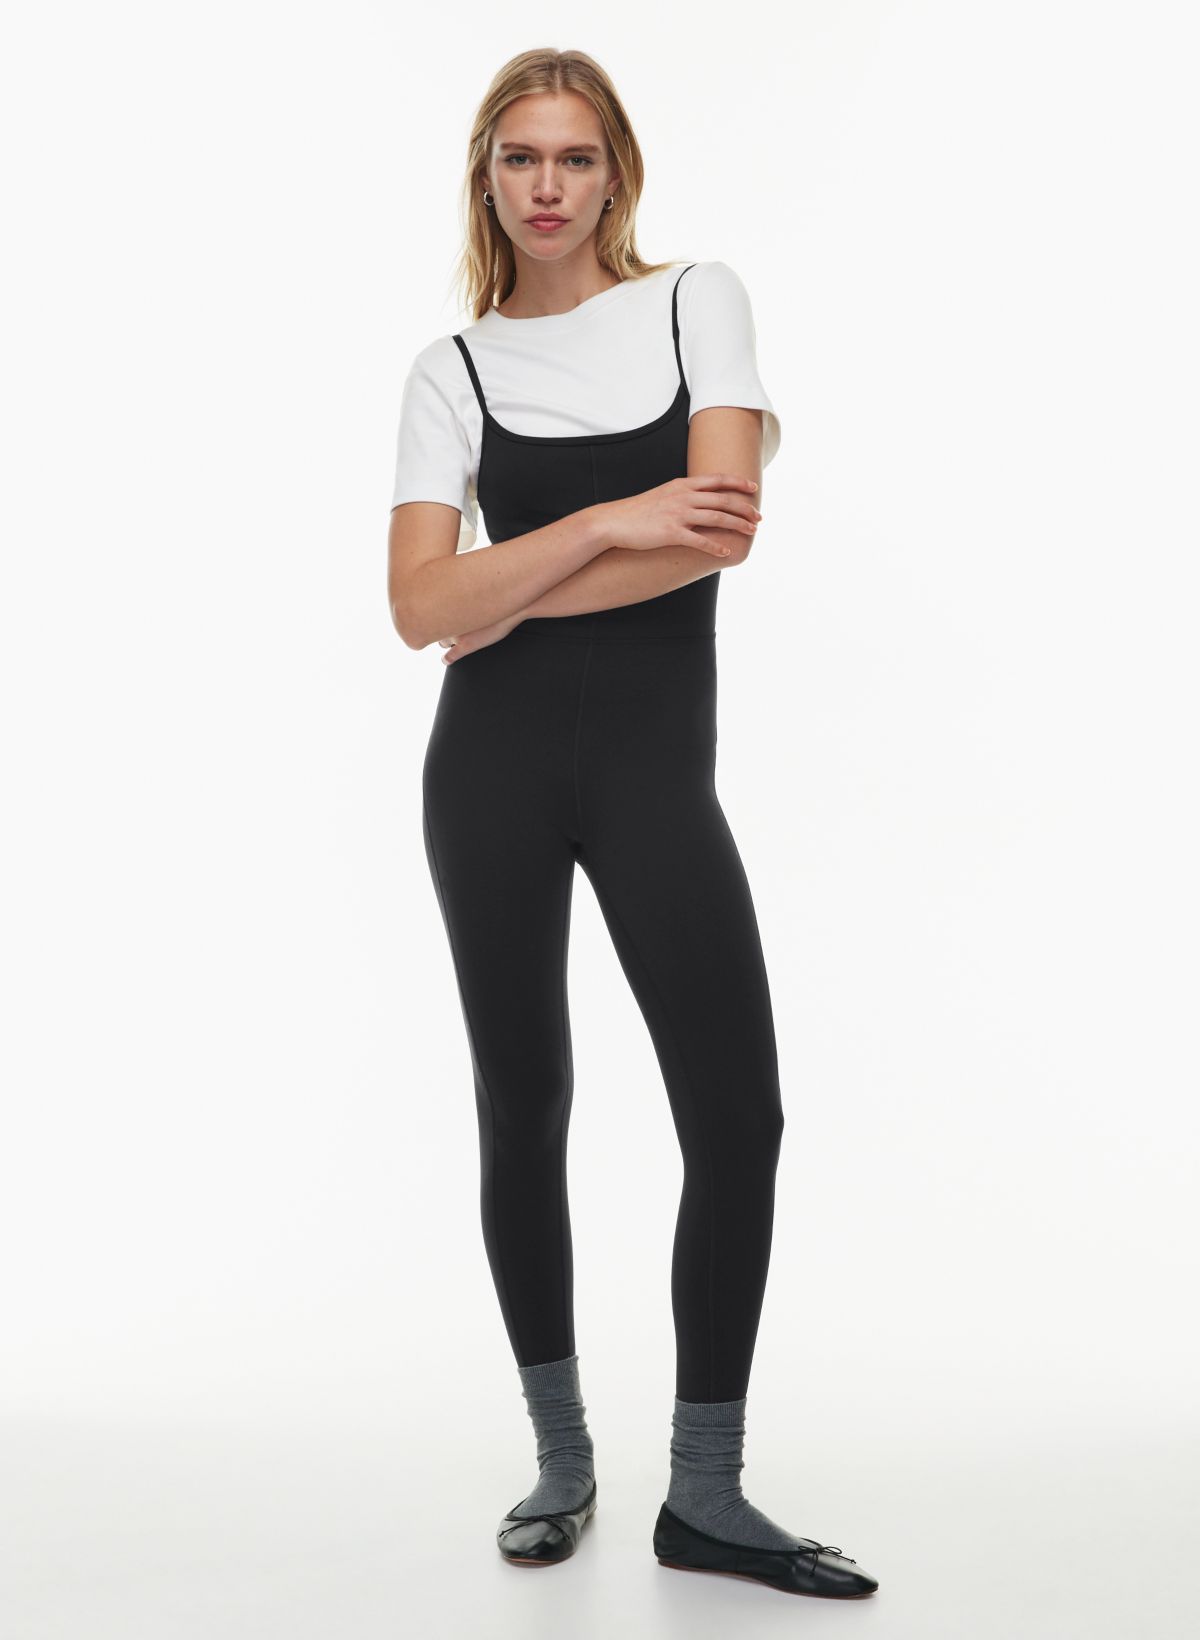 yoga pants brand from ballet company : r/BALLET